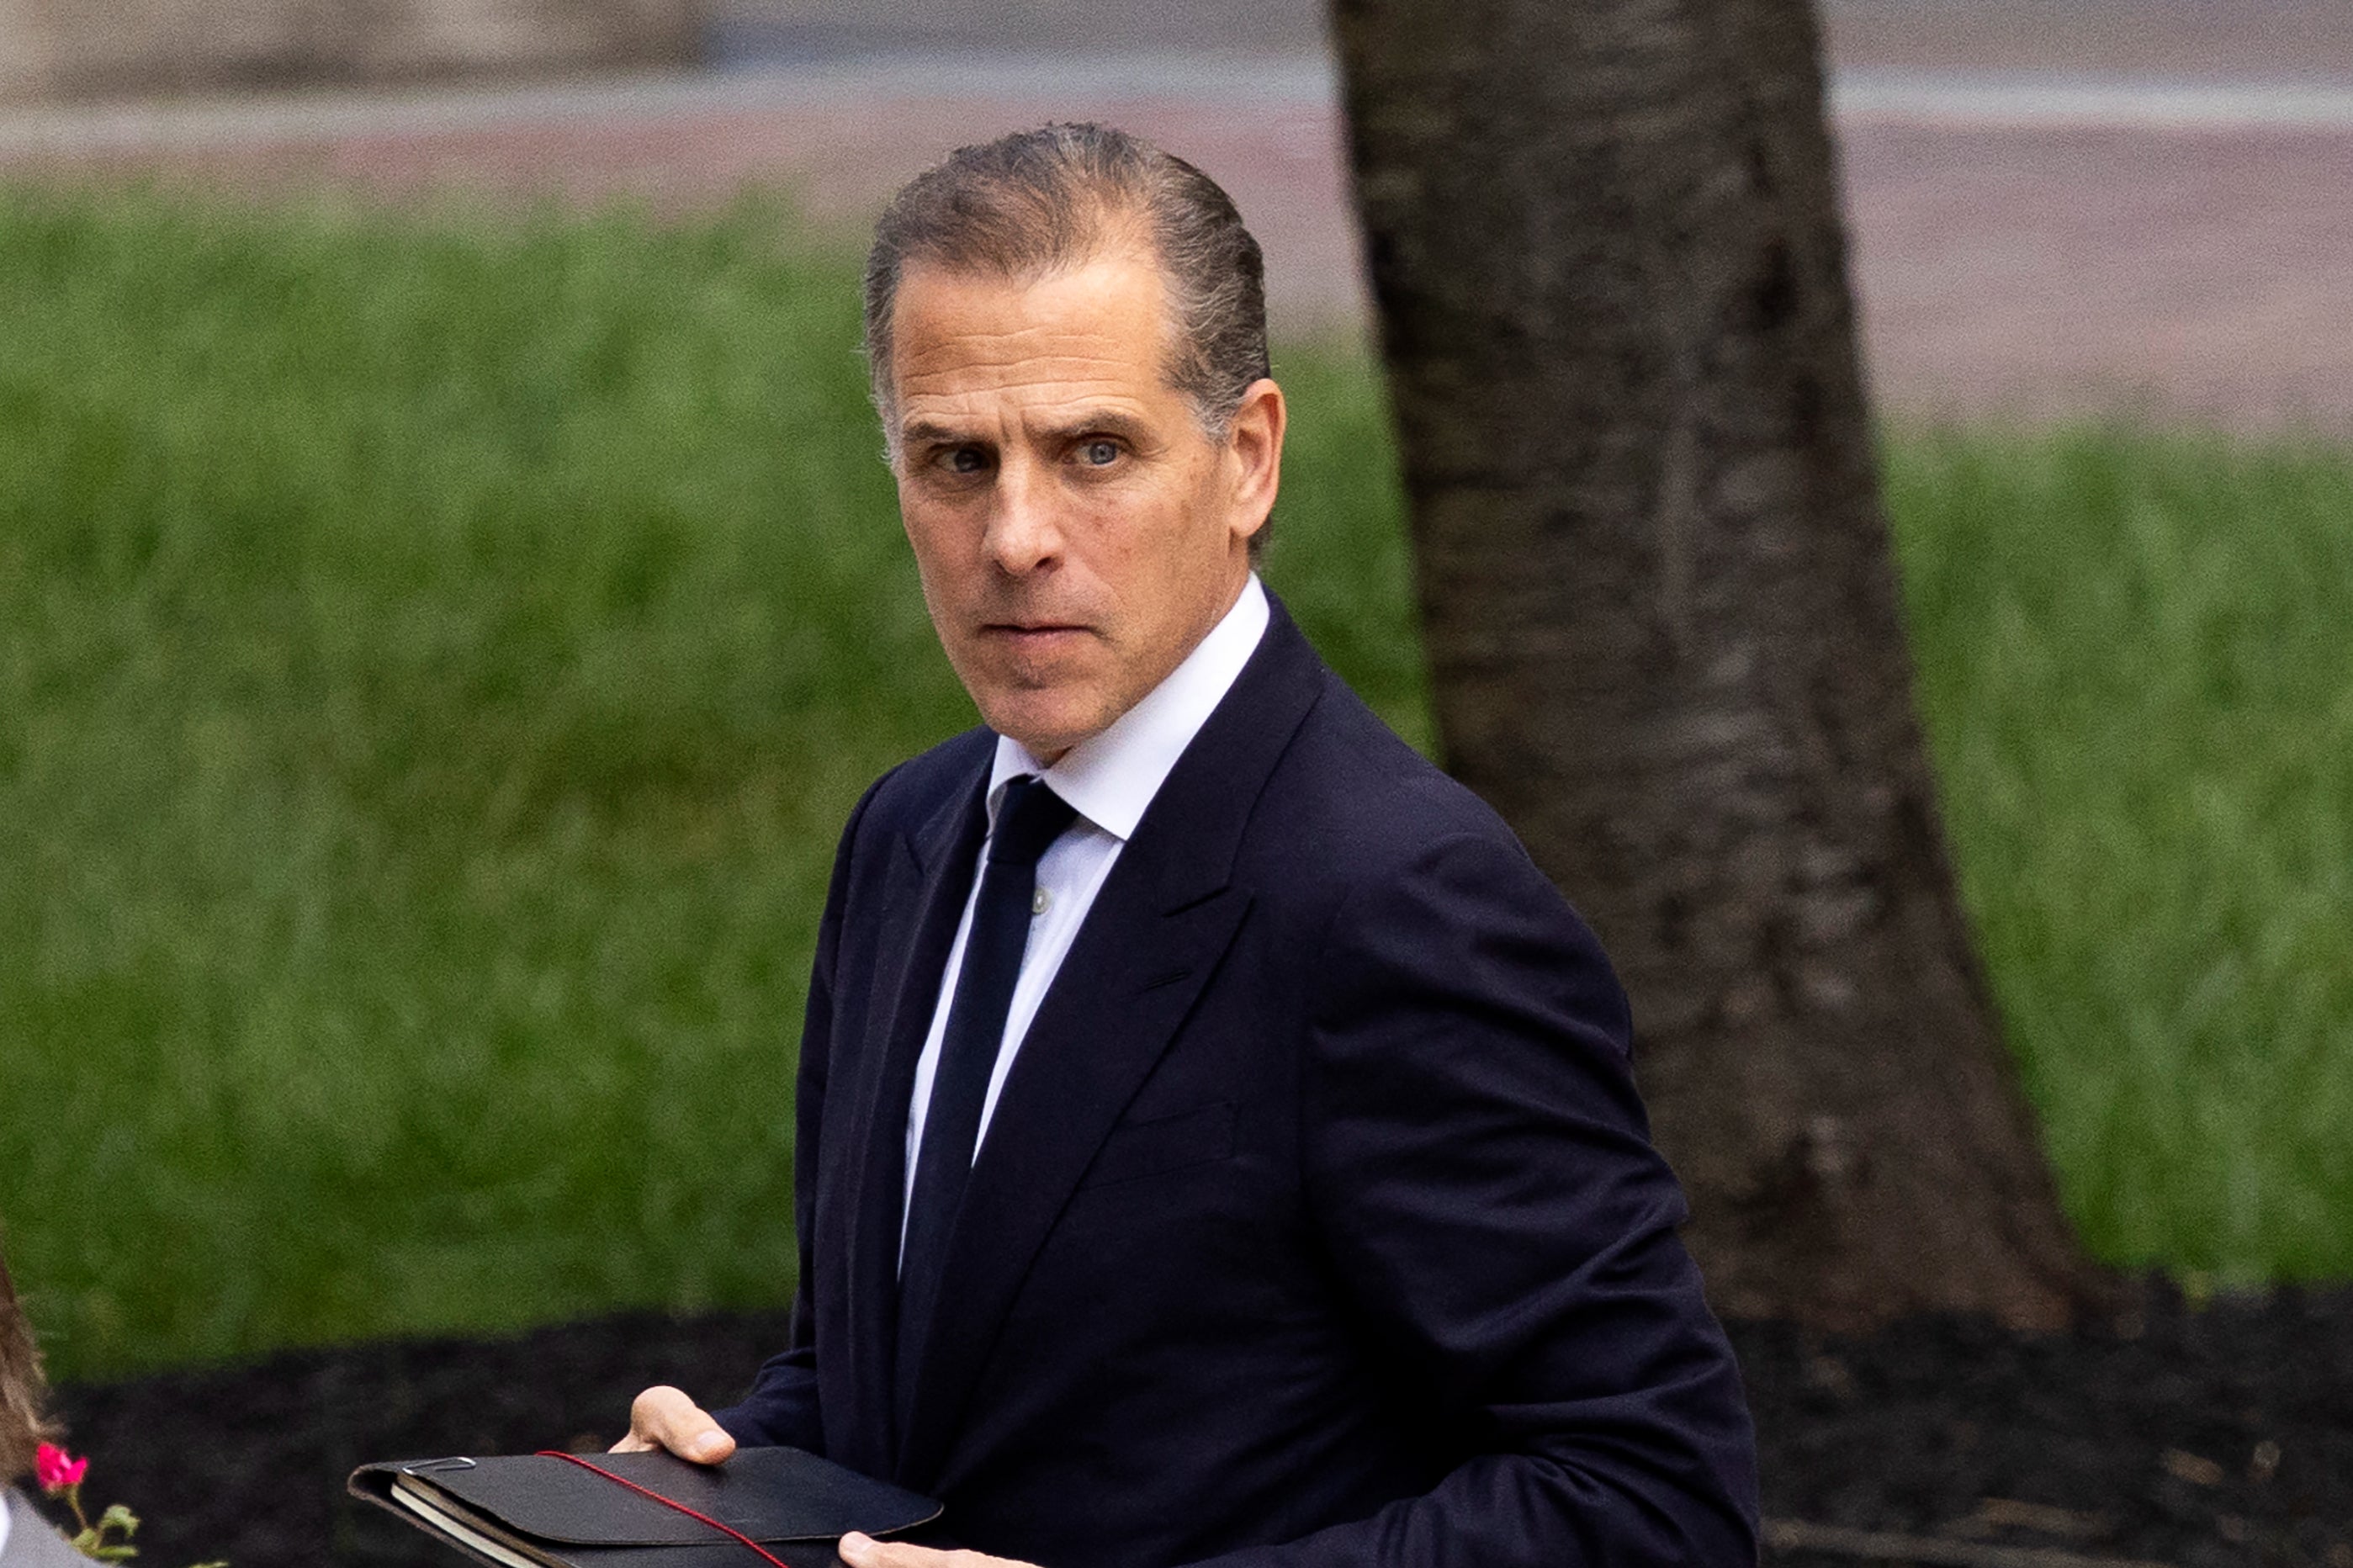 Hunter Biden, son of Joe Biden, exits the J Caleb Boggs Federal Building on June 10, 2024 in Wilmington, Delaware during his federal gun charges trial